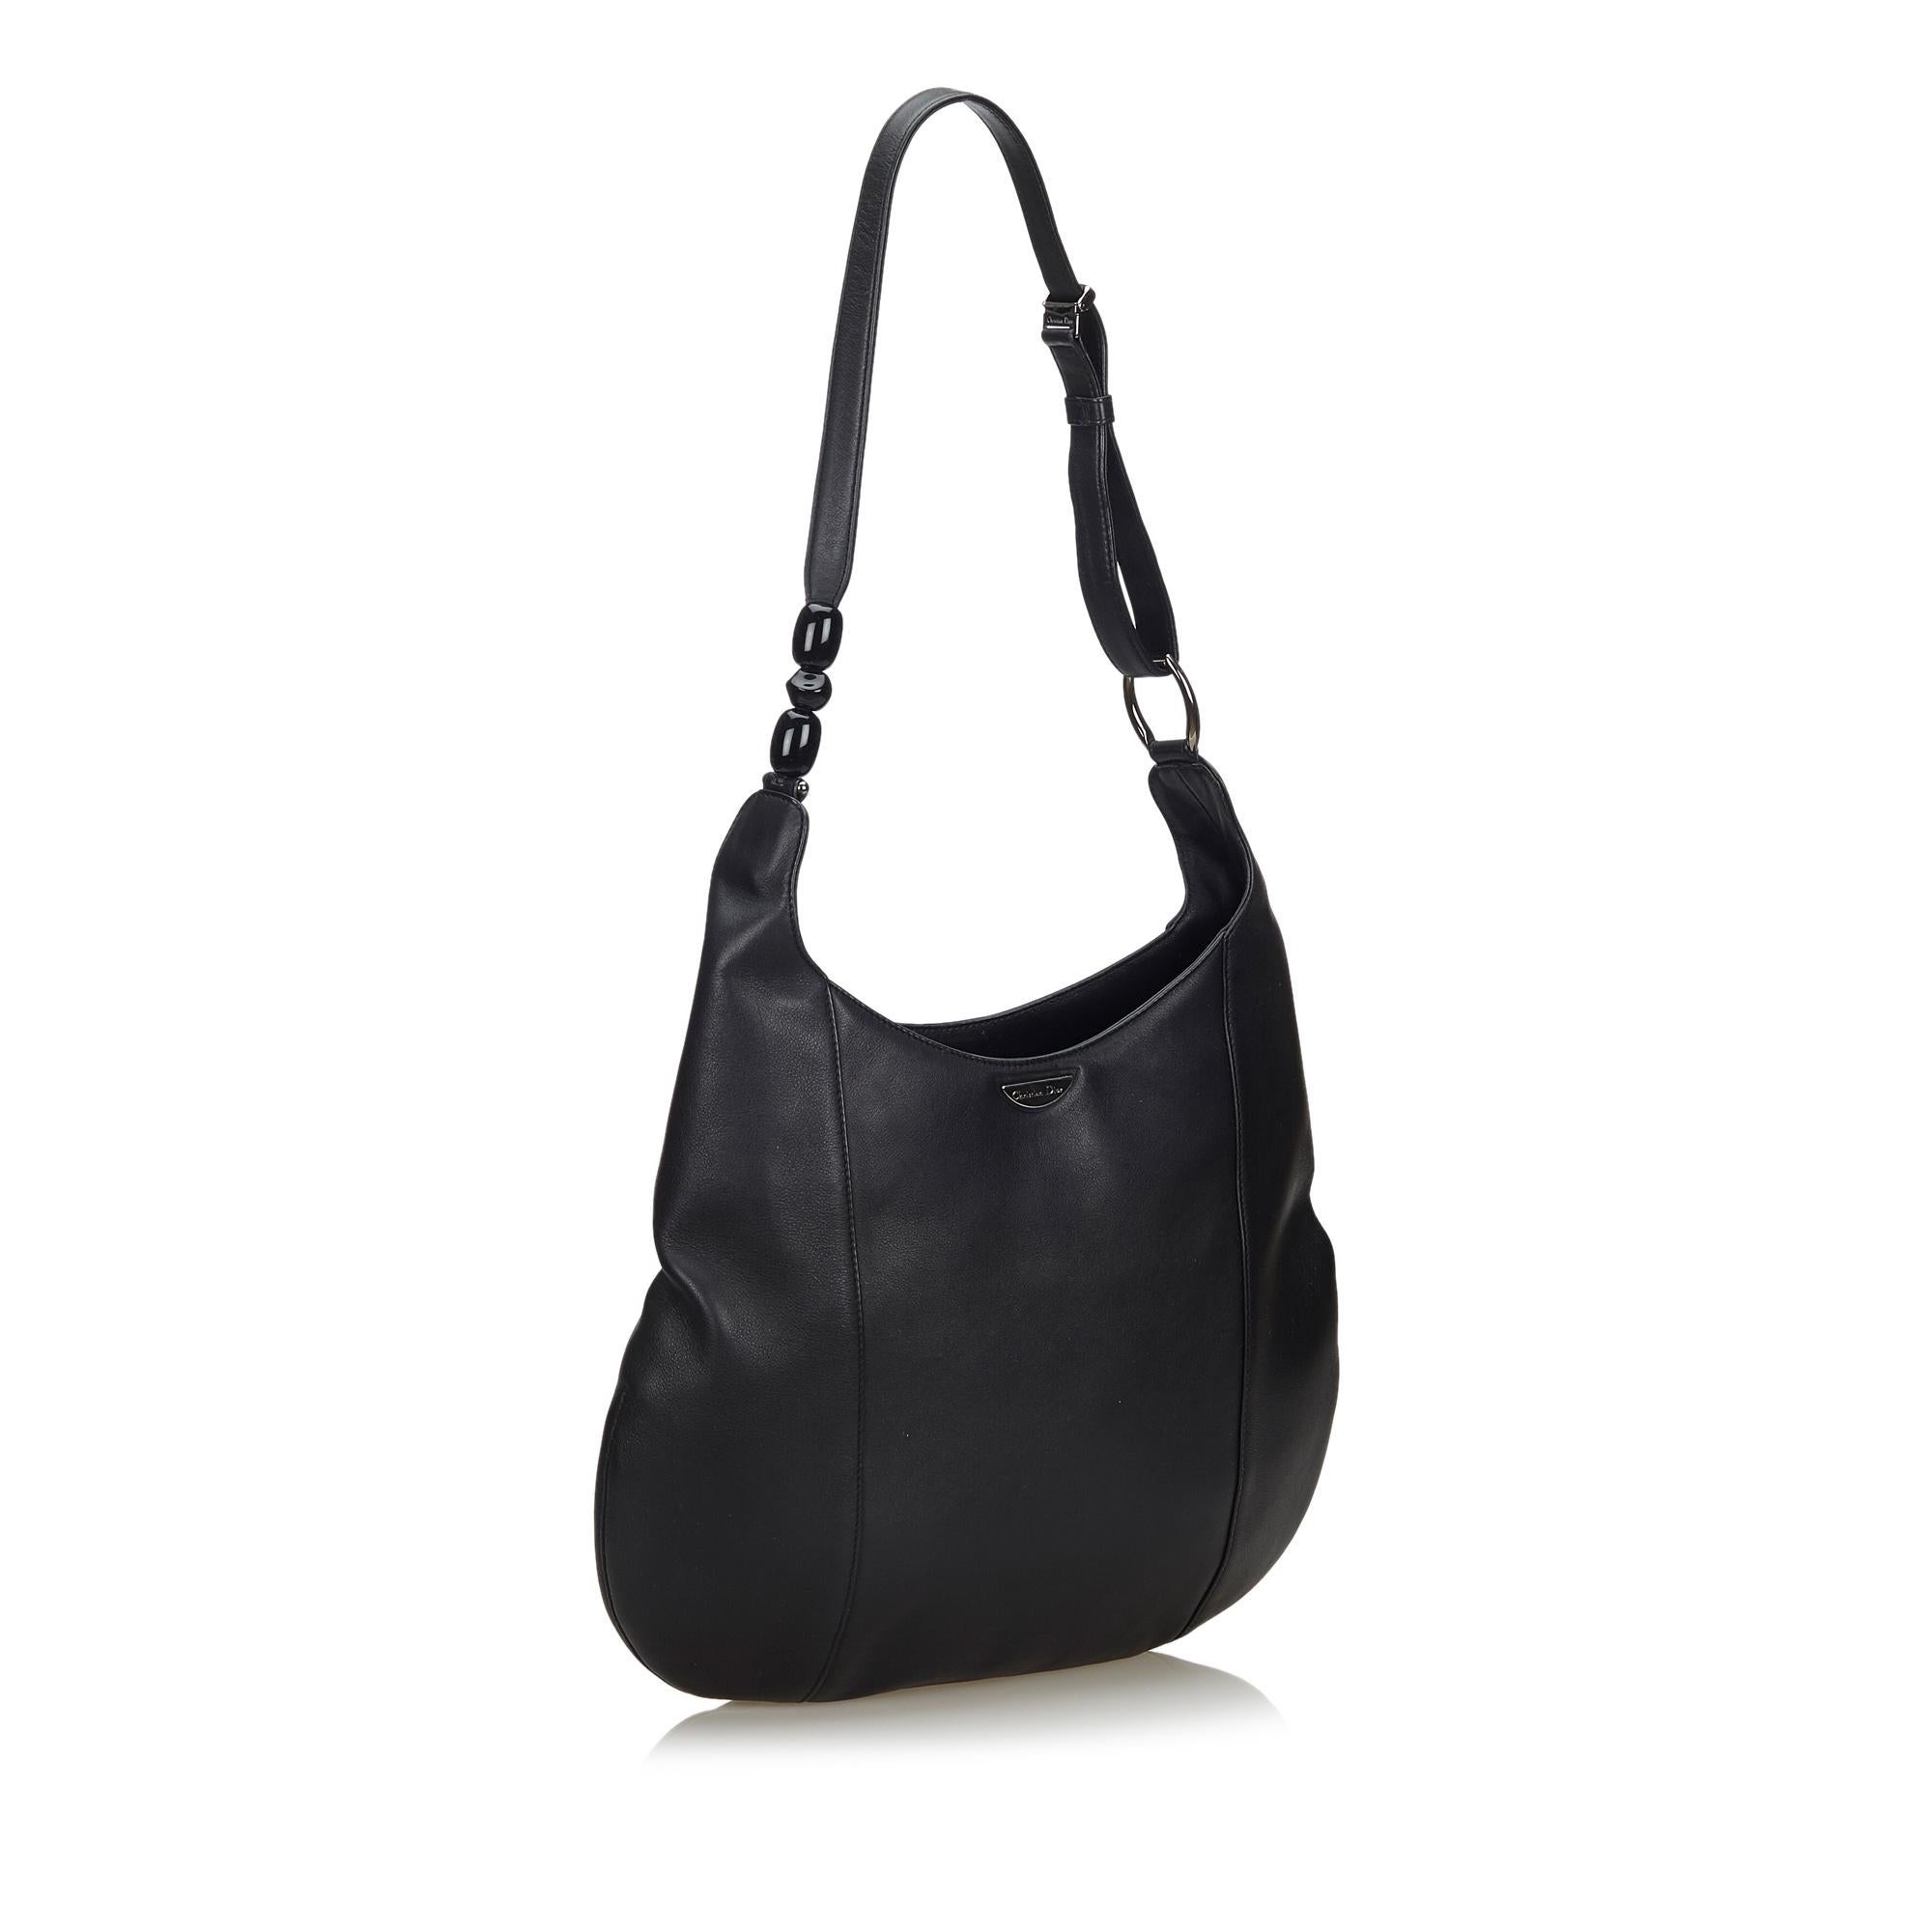 This hobo bag features a leather body, a flat leather strap with pearl detail, a top zip closure, and an interior zip pocket. It carries as AB condition rating.

Inclusions: 
This item does not come with inclusions.

Dimensions:
Length: 27.00